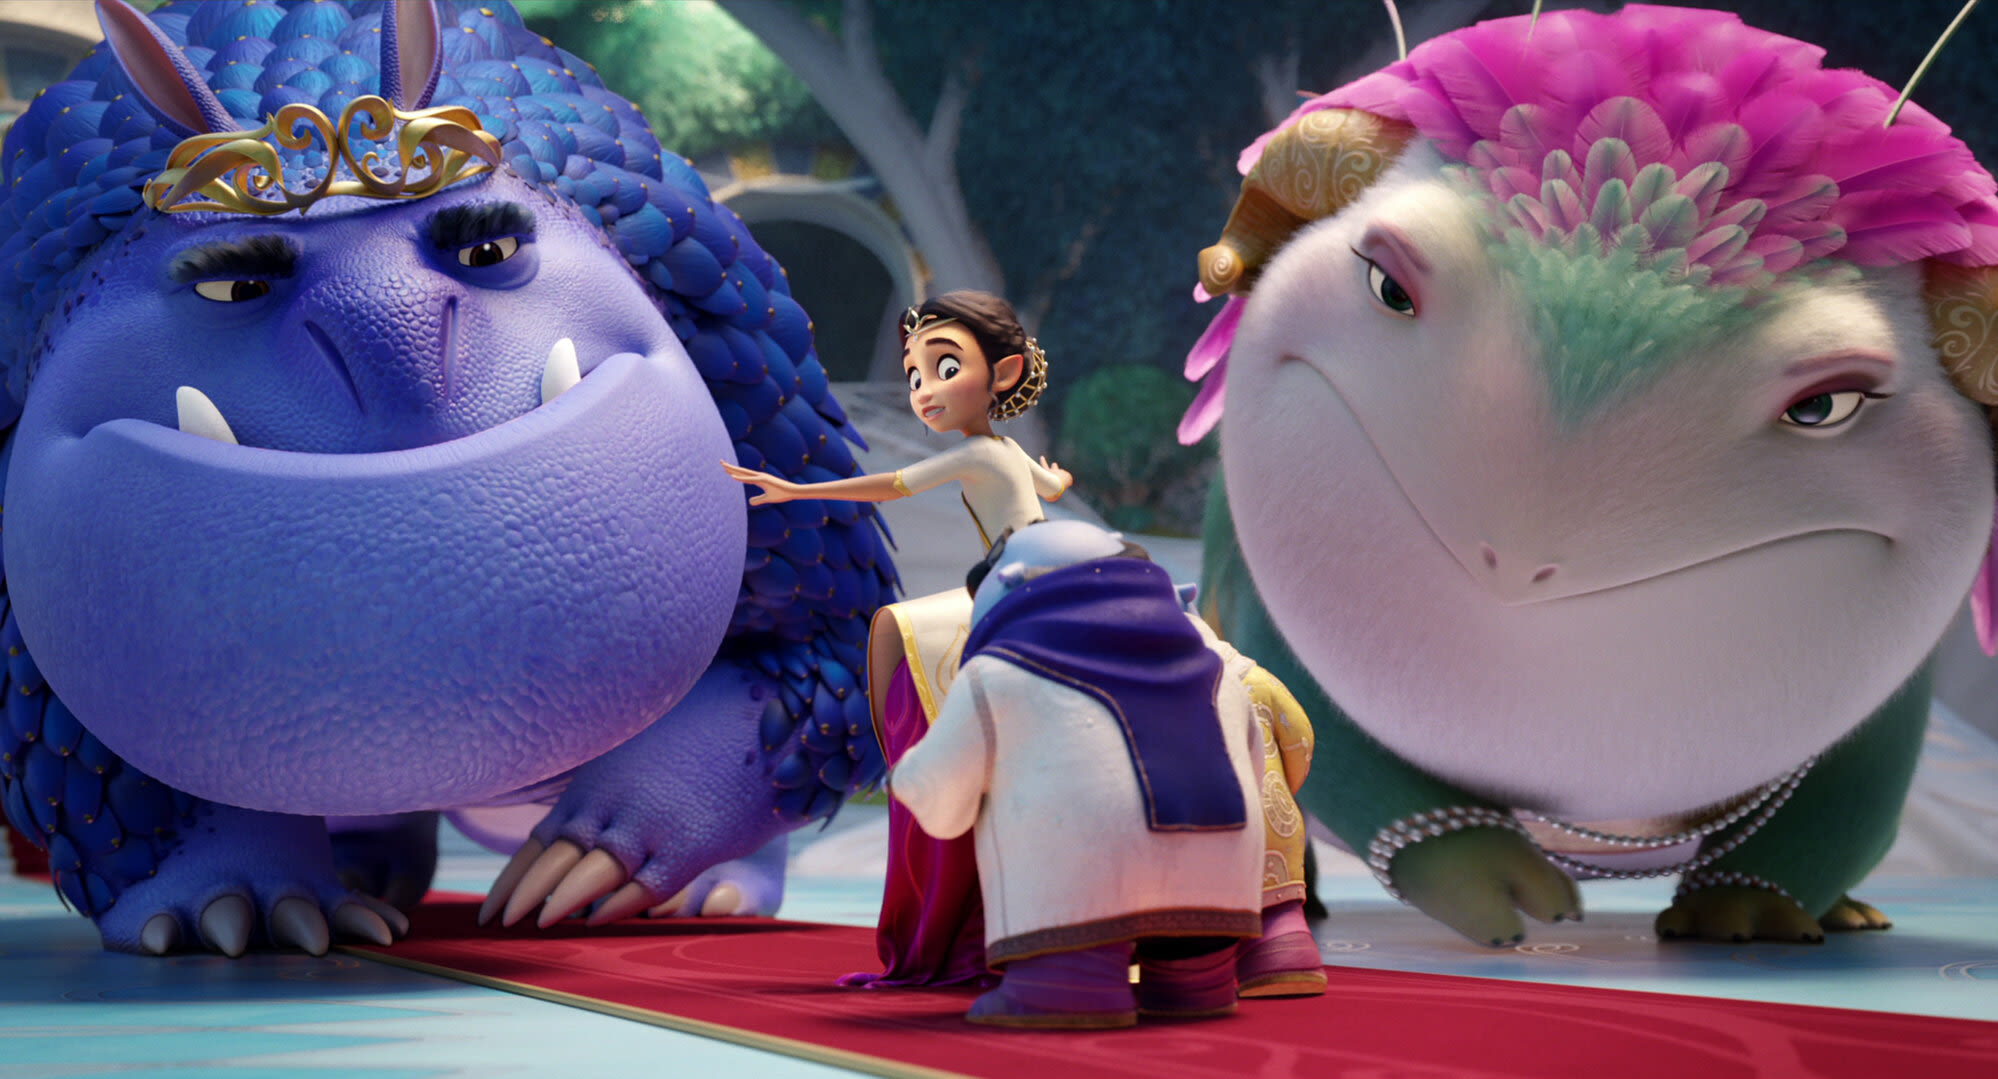 Netflix is releasing a cute animated film from filmmakers behind Shrek and Toy Story